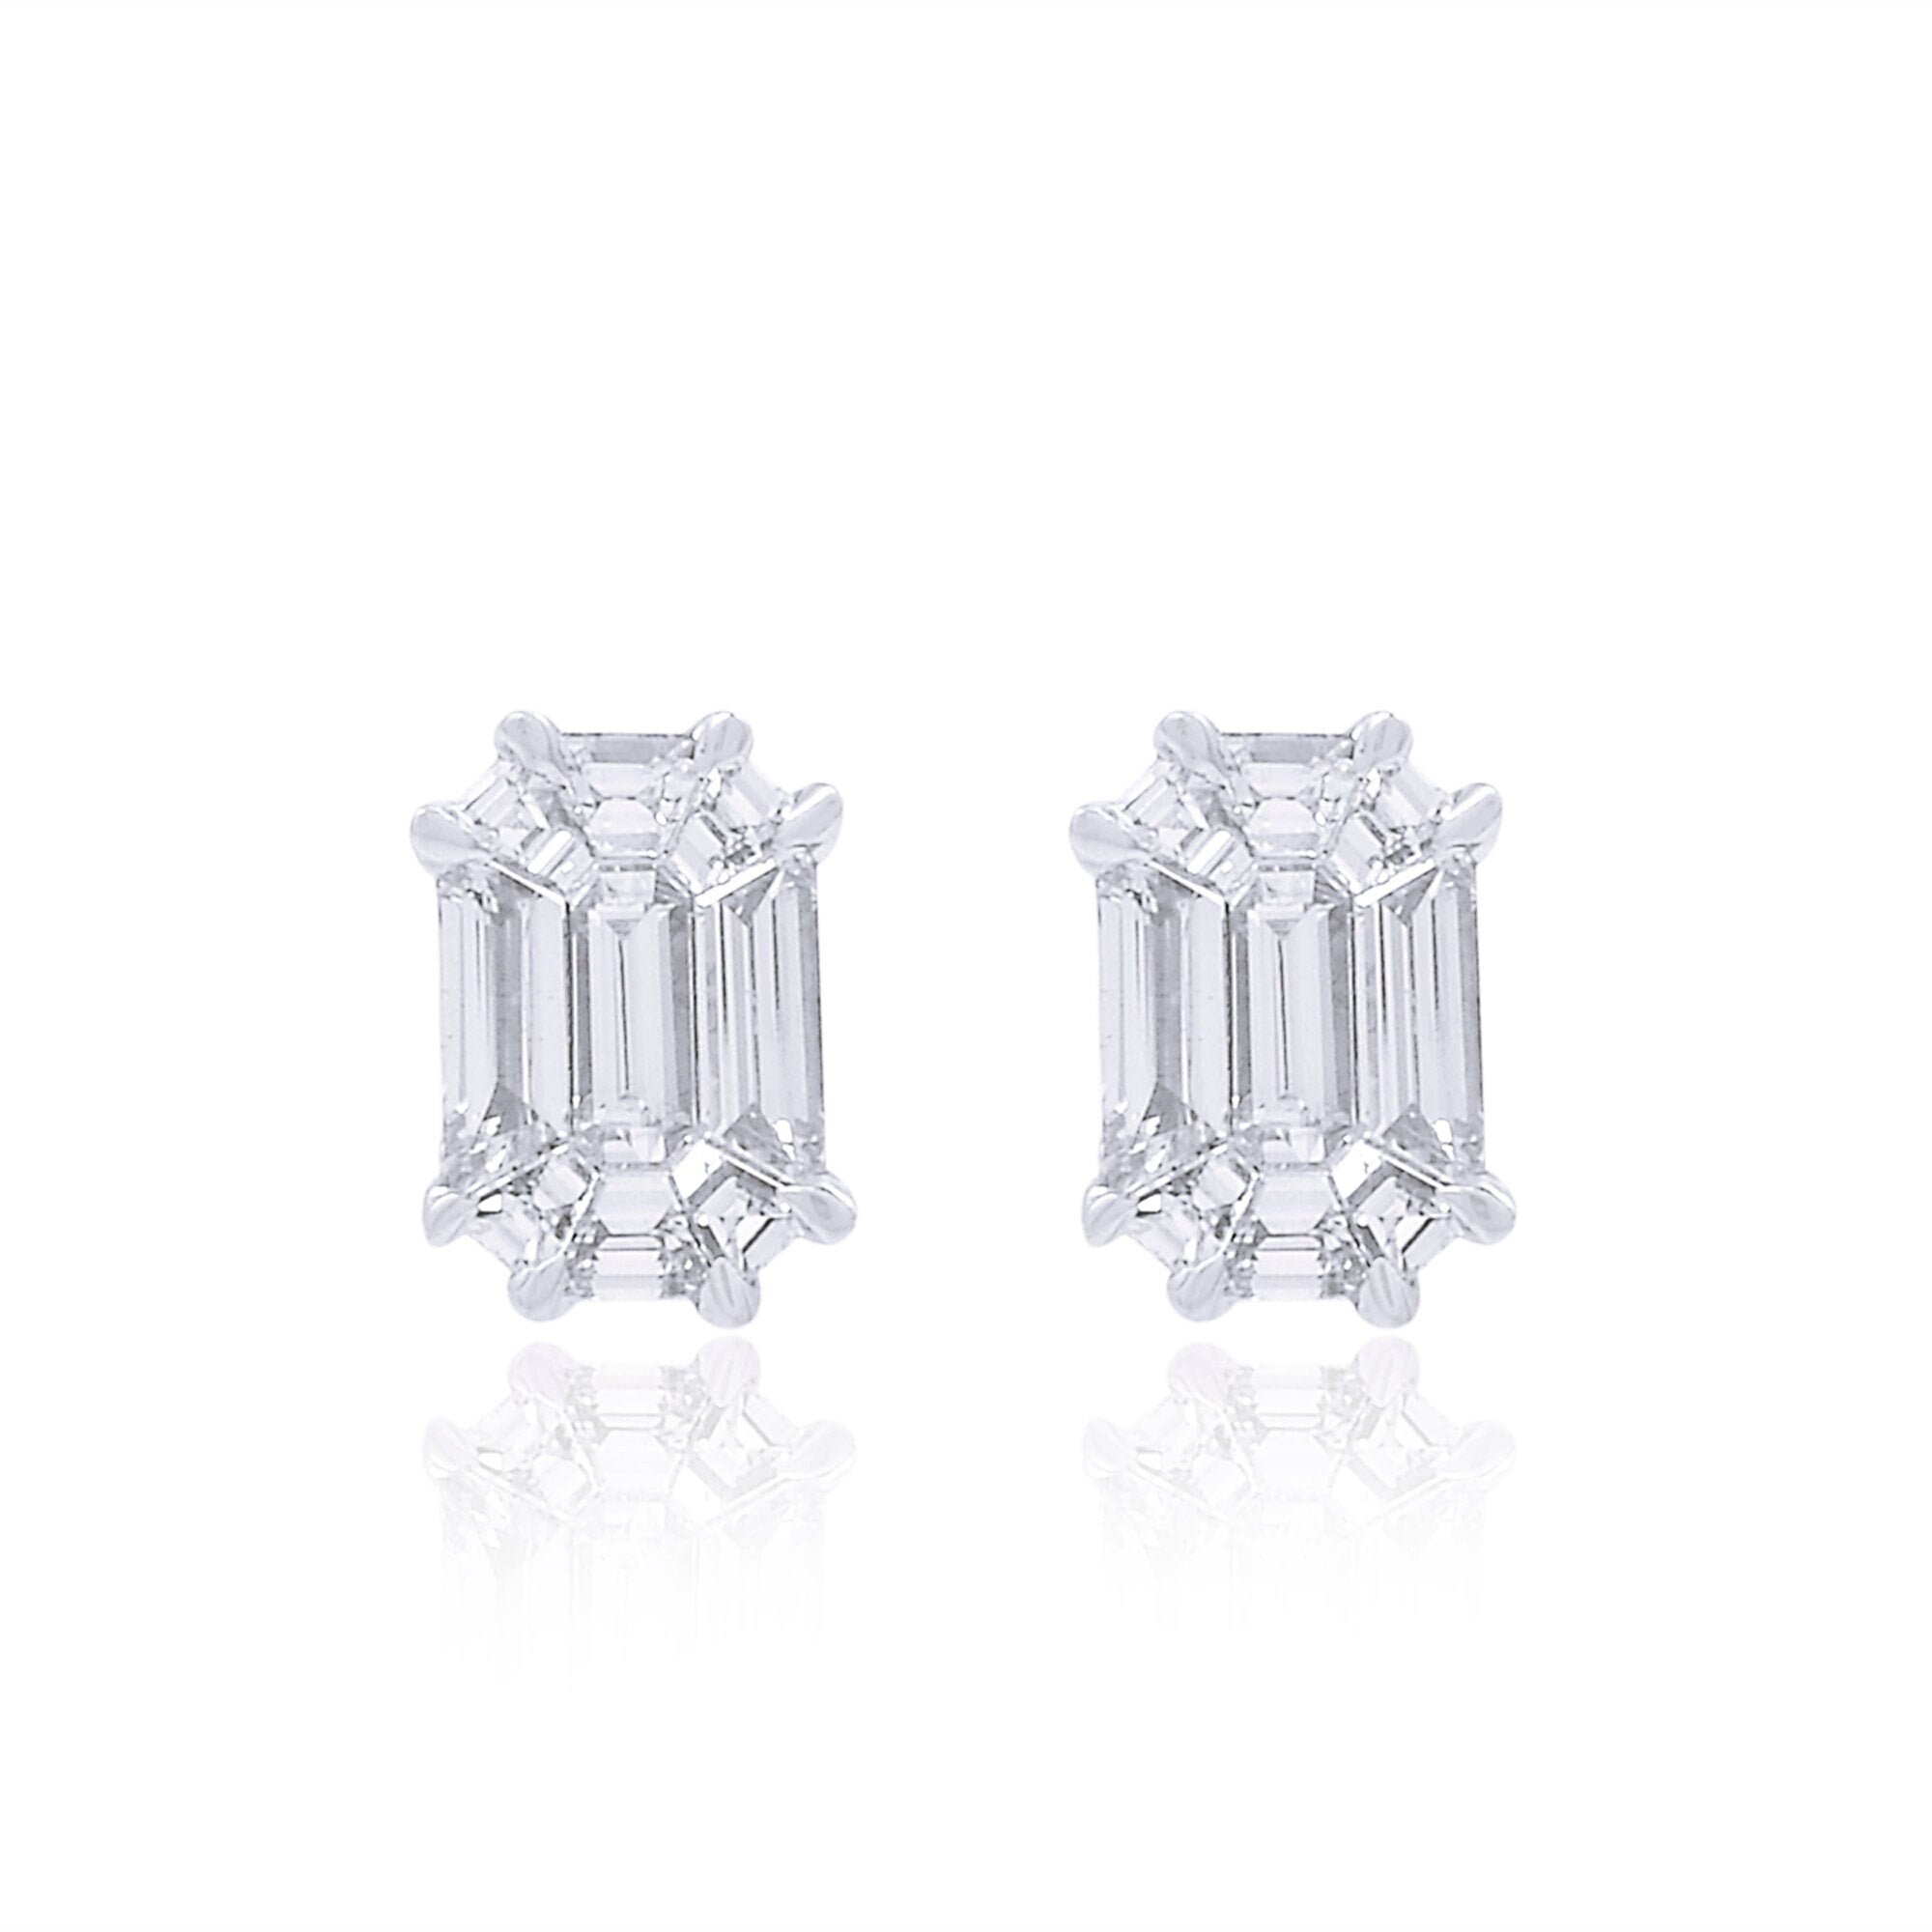 14K White Gold Stud Earrings Natural 1.20 Tcw Hi/Si Octagonal Baguette Diamond Handmade Jewelry Gifts For Her